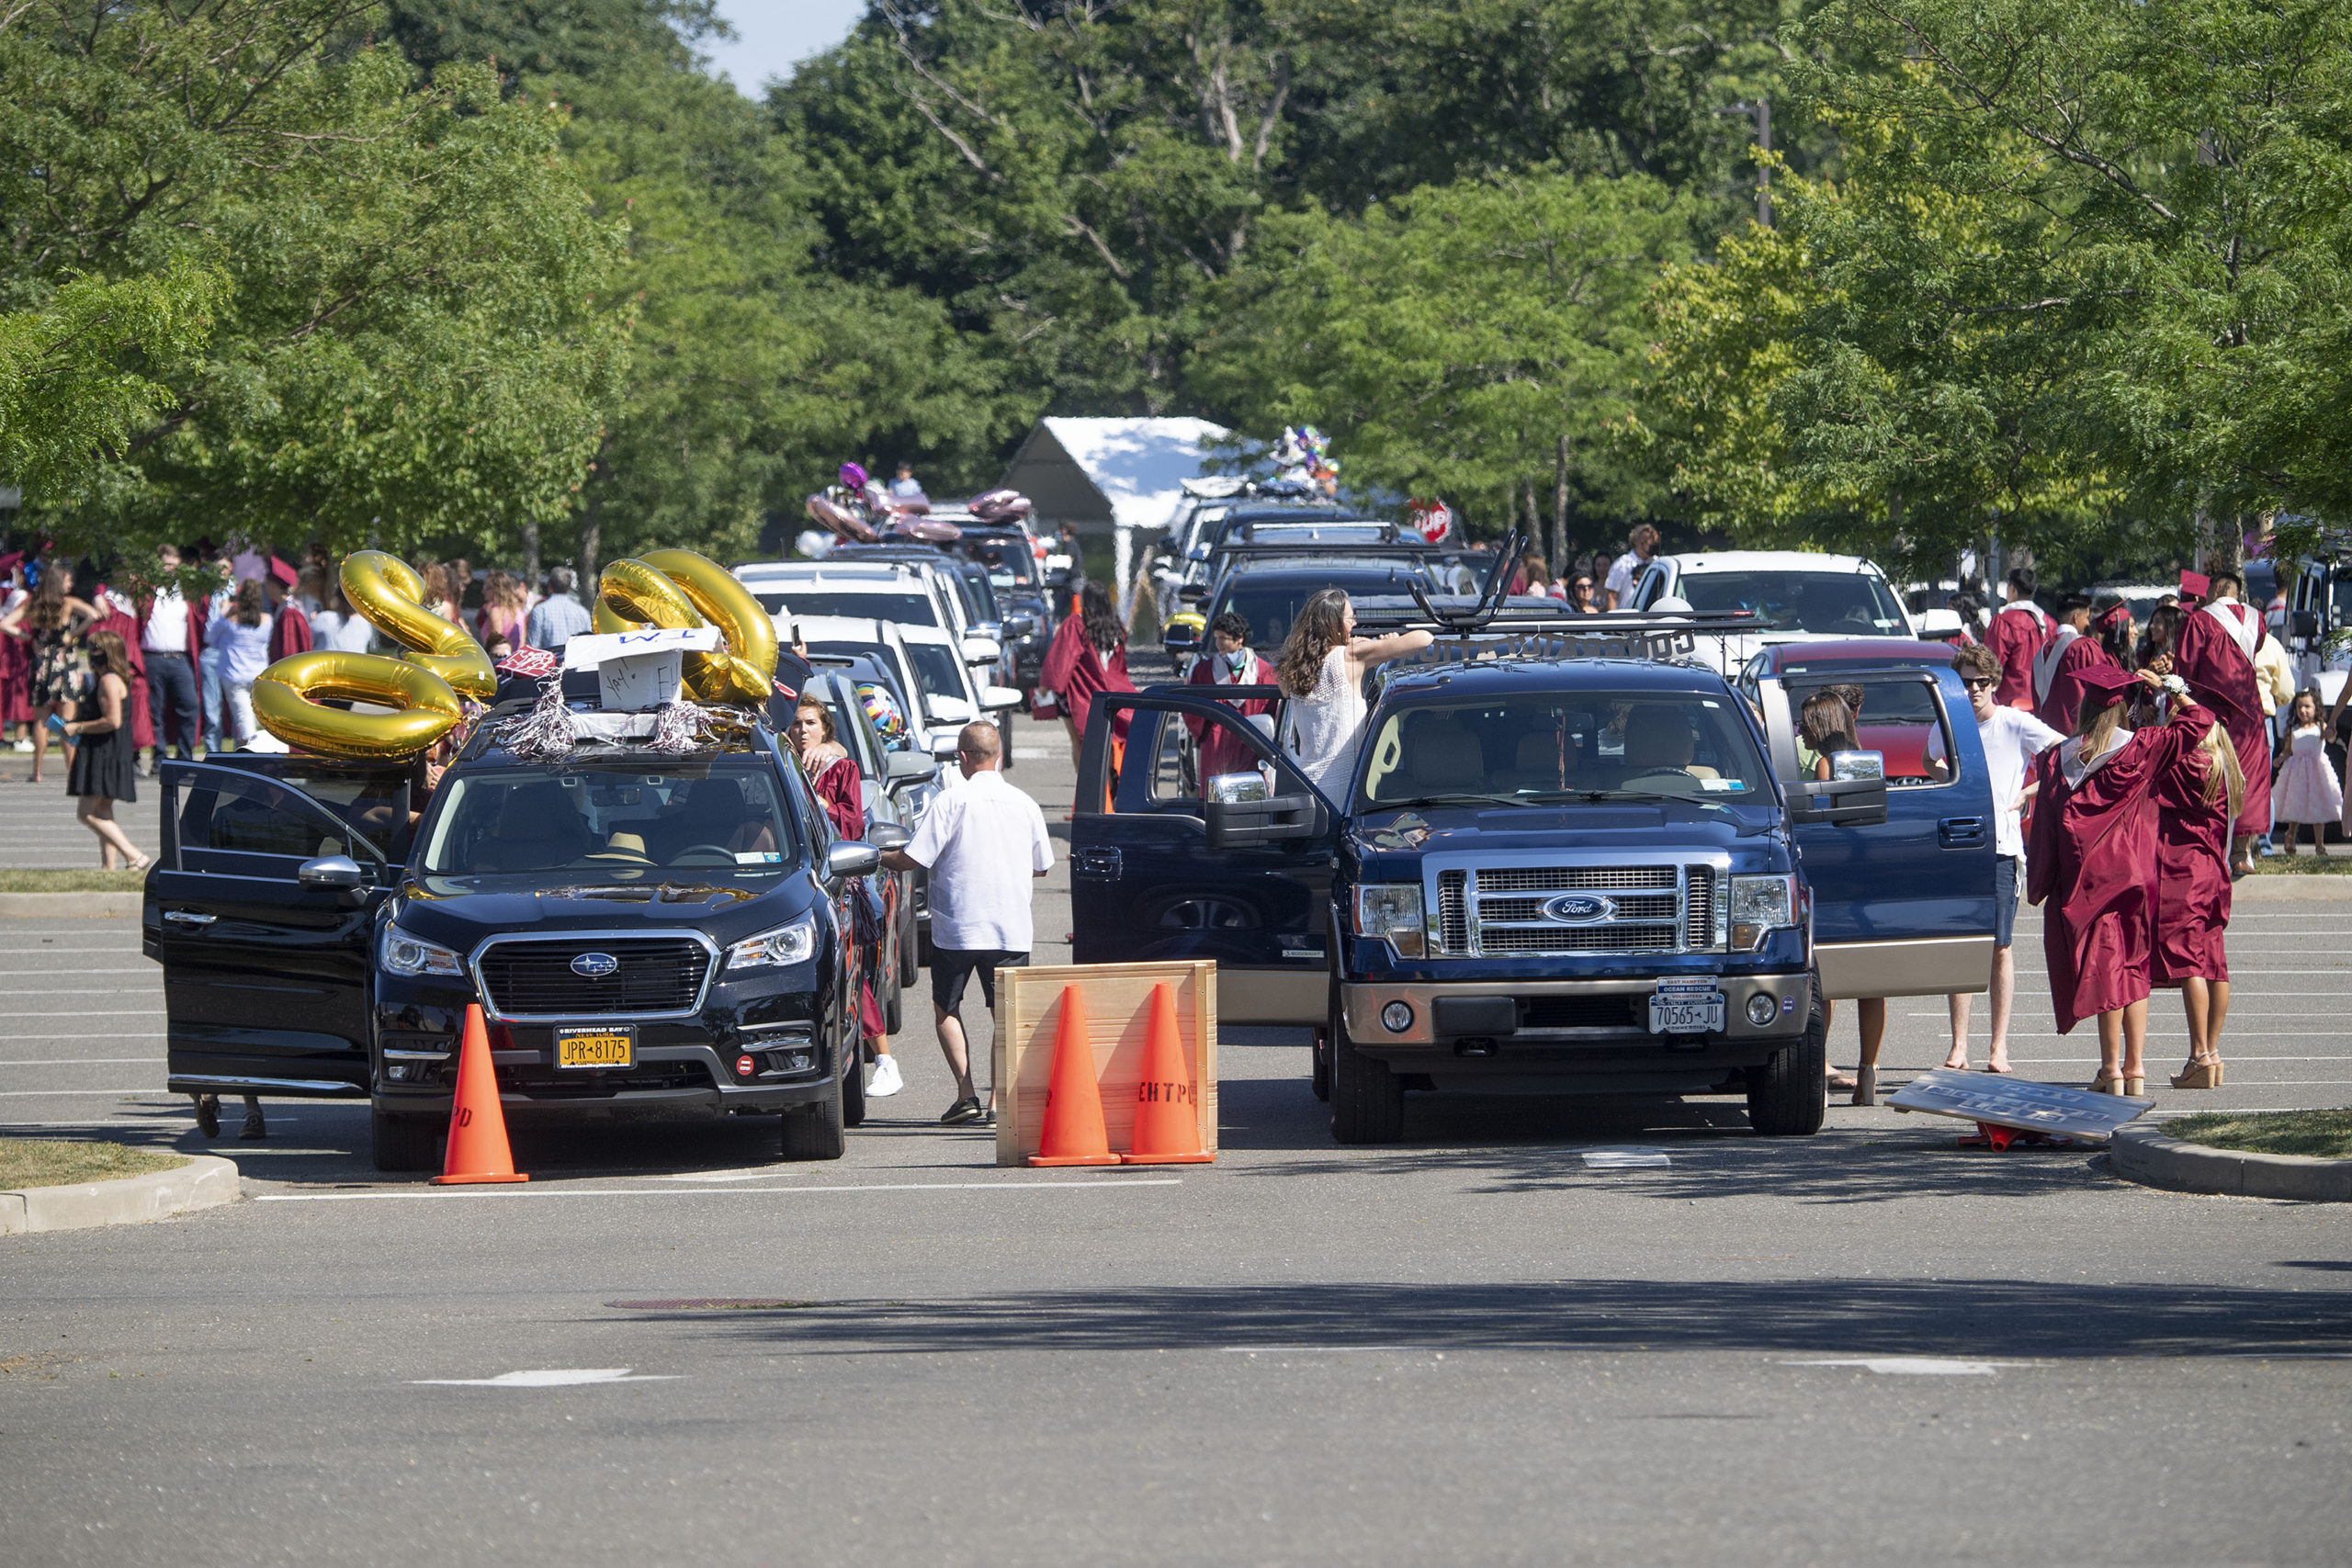 Cars line up in the parking lot by district as the seniors' families get ready to participate in the 2020 graduation ceremony at the East Hampton High School on Friday.